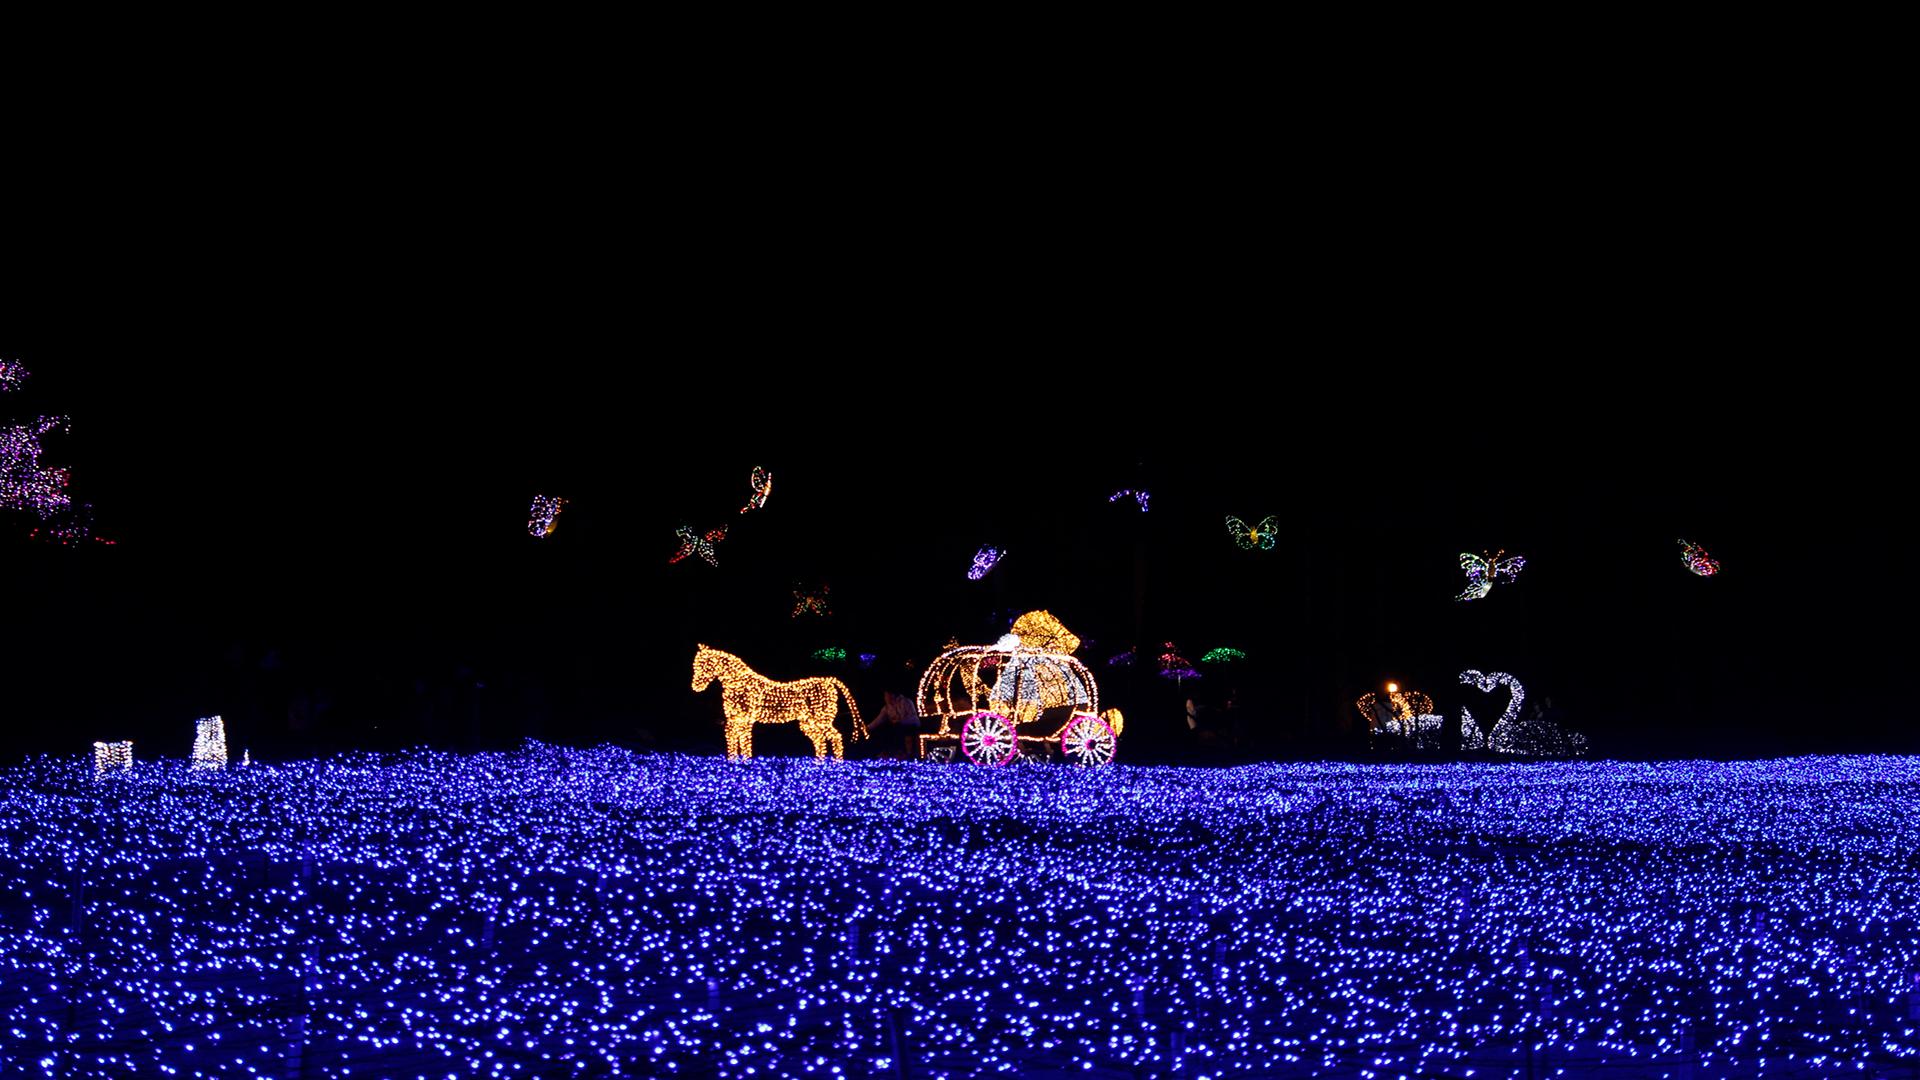 colorful statues and flowers adorn Namisum Island's peaceful Arboretum during an electric blue light festival.